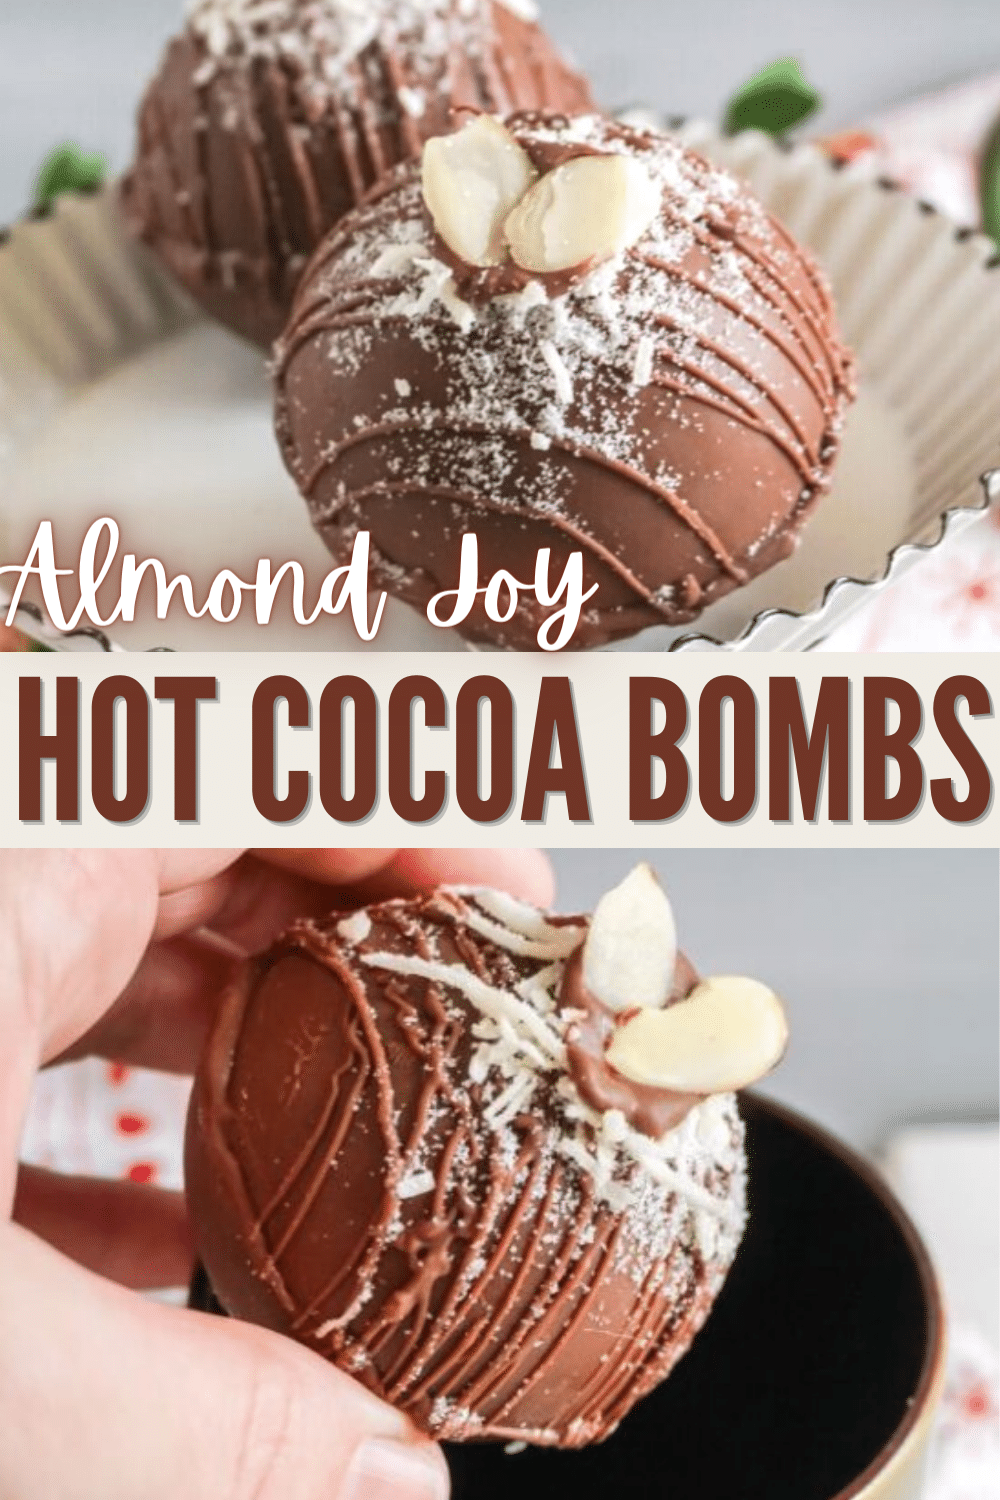 These Almond Joy Hot Cocoa Bombs will make you leave those candy bars at the store and make this instead. Taste just the same! #almondjoy #hotcocoabombs #hotcocoa #recipe via @wondermomwannab